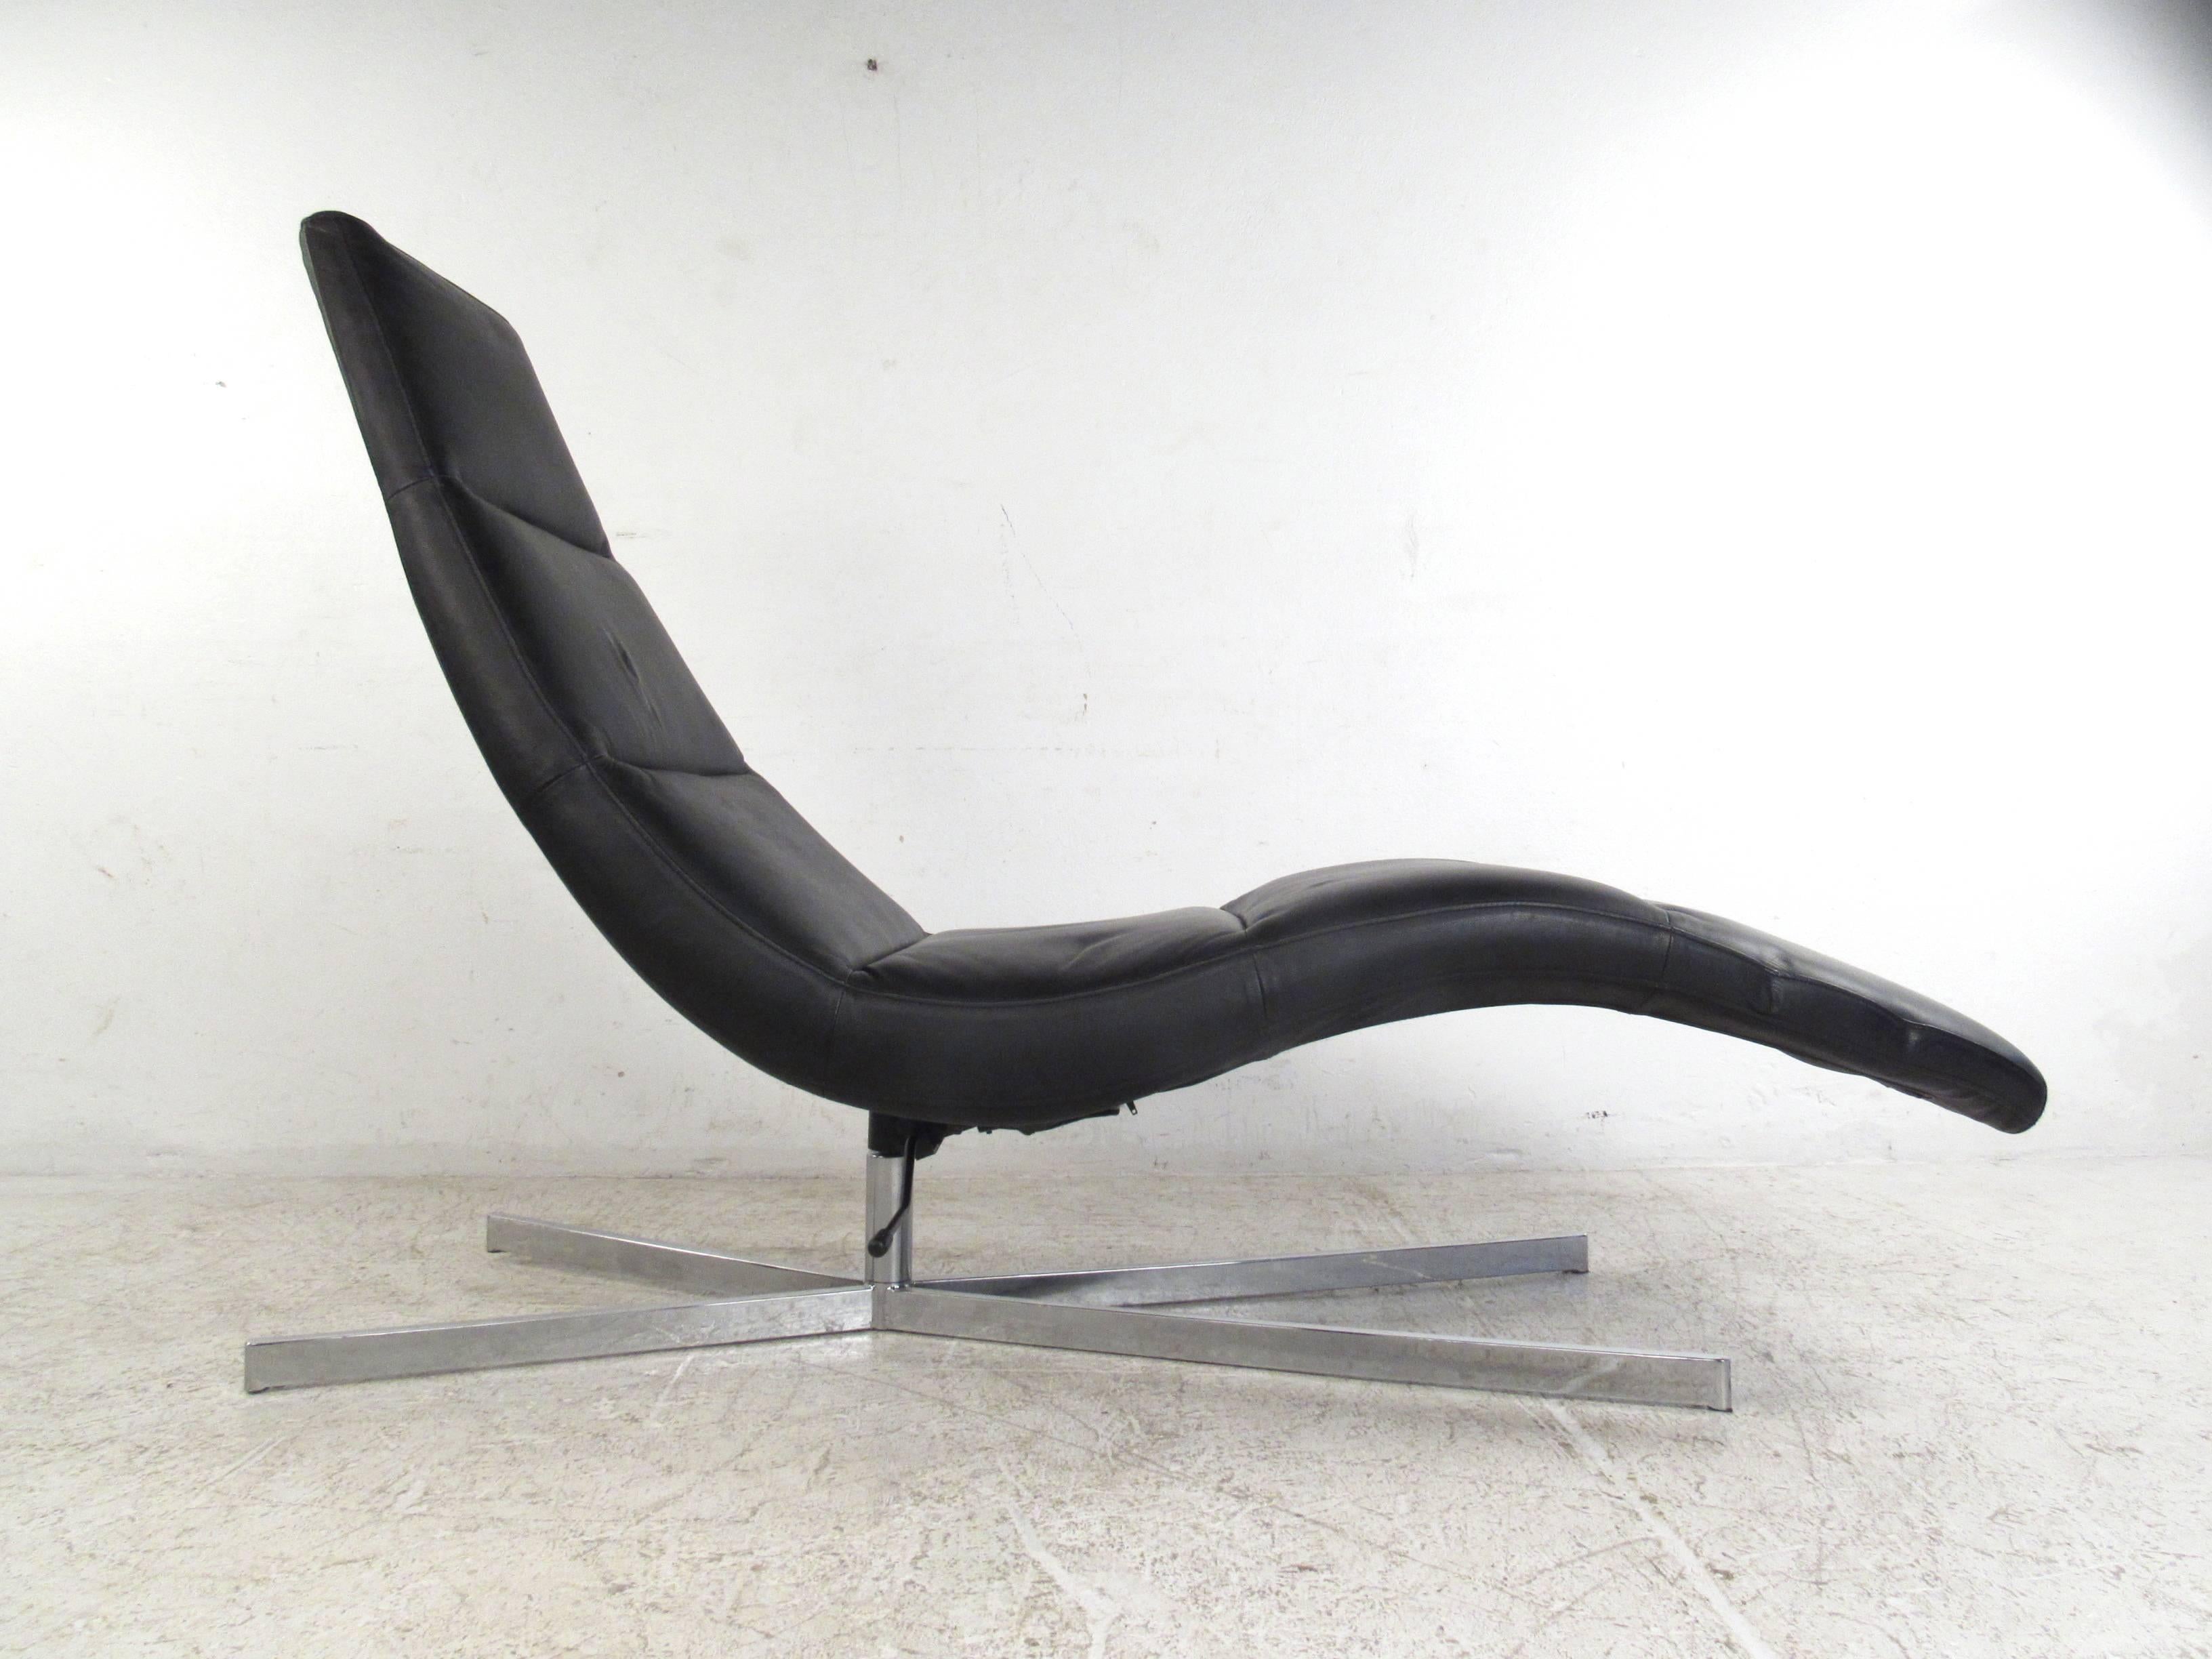 This stylish and comfortable swivel lounge chair makes a fantastic chaise lounge like seating option in any modern interior. Carefully contoured upholstery swivels and reclines on a sturdy X-style chrome base. Rich black leather upholstery